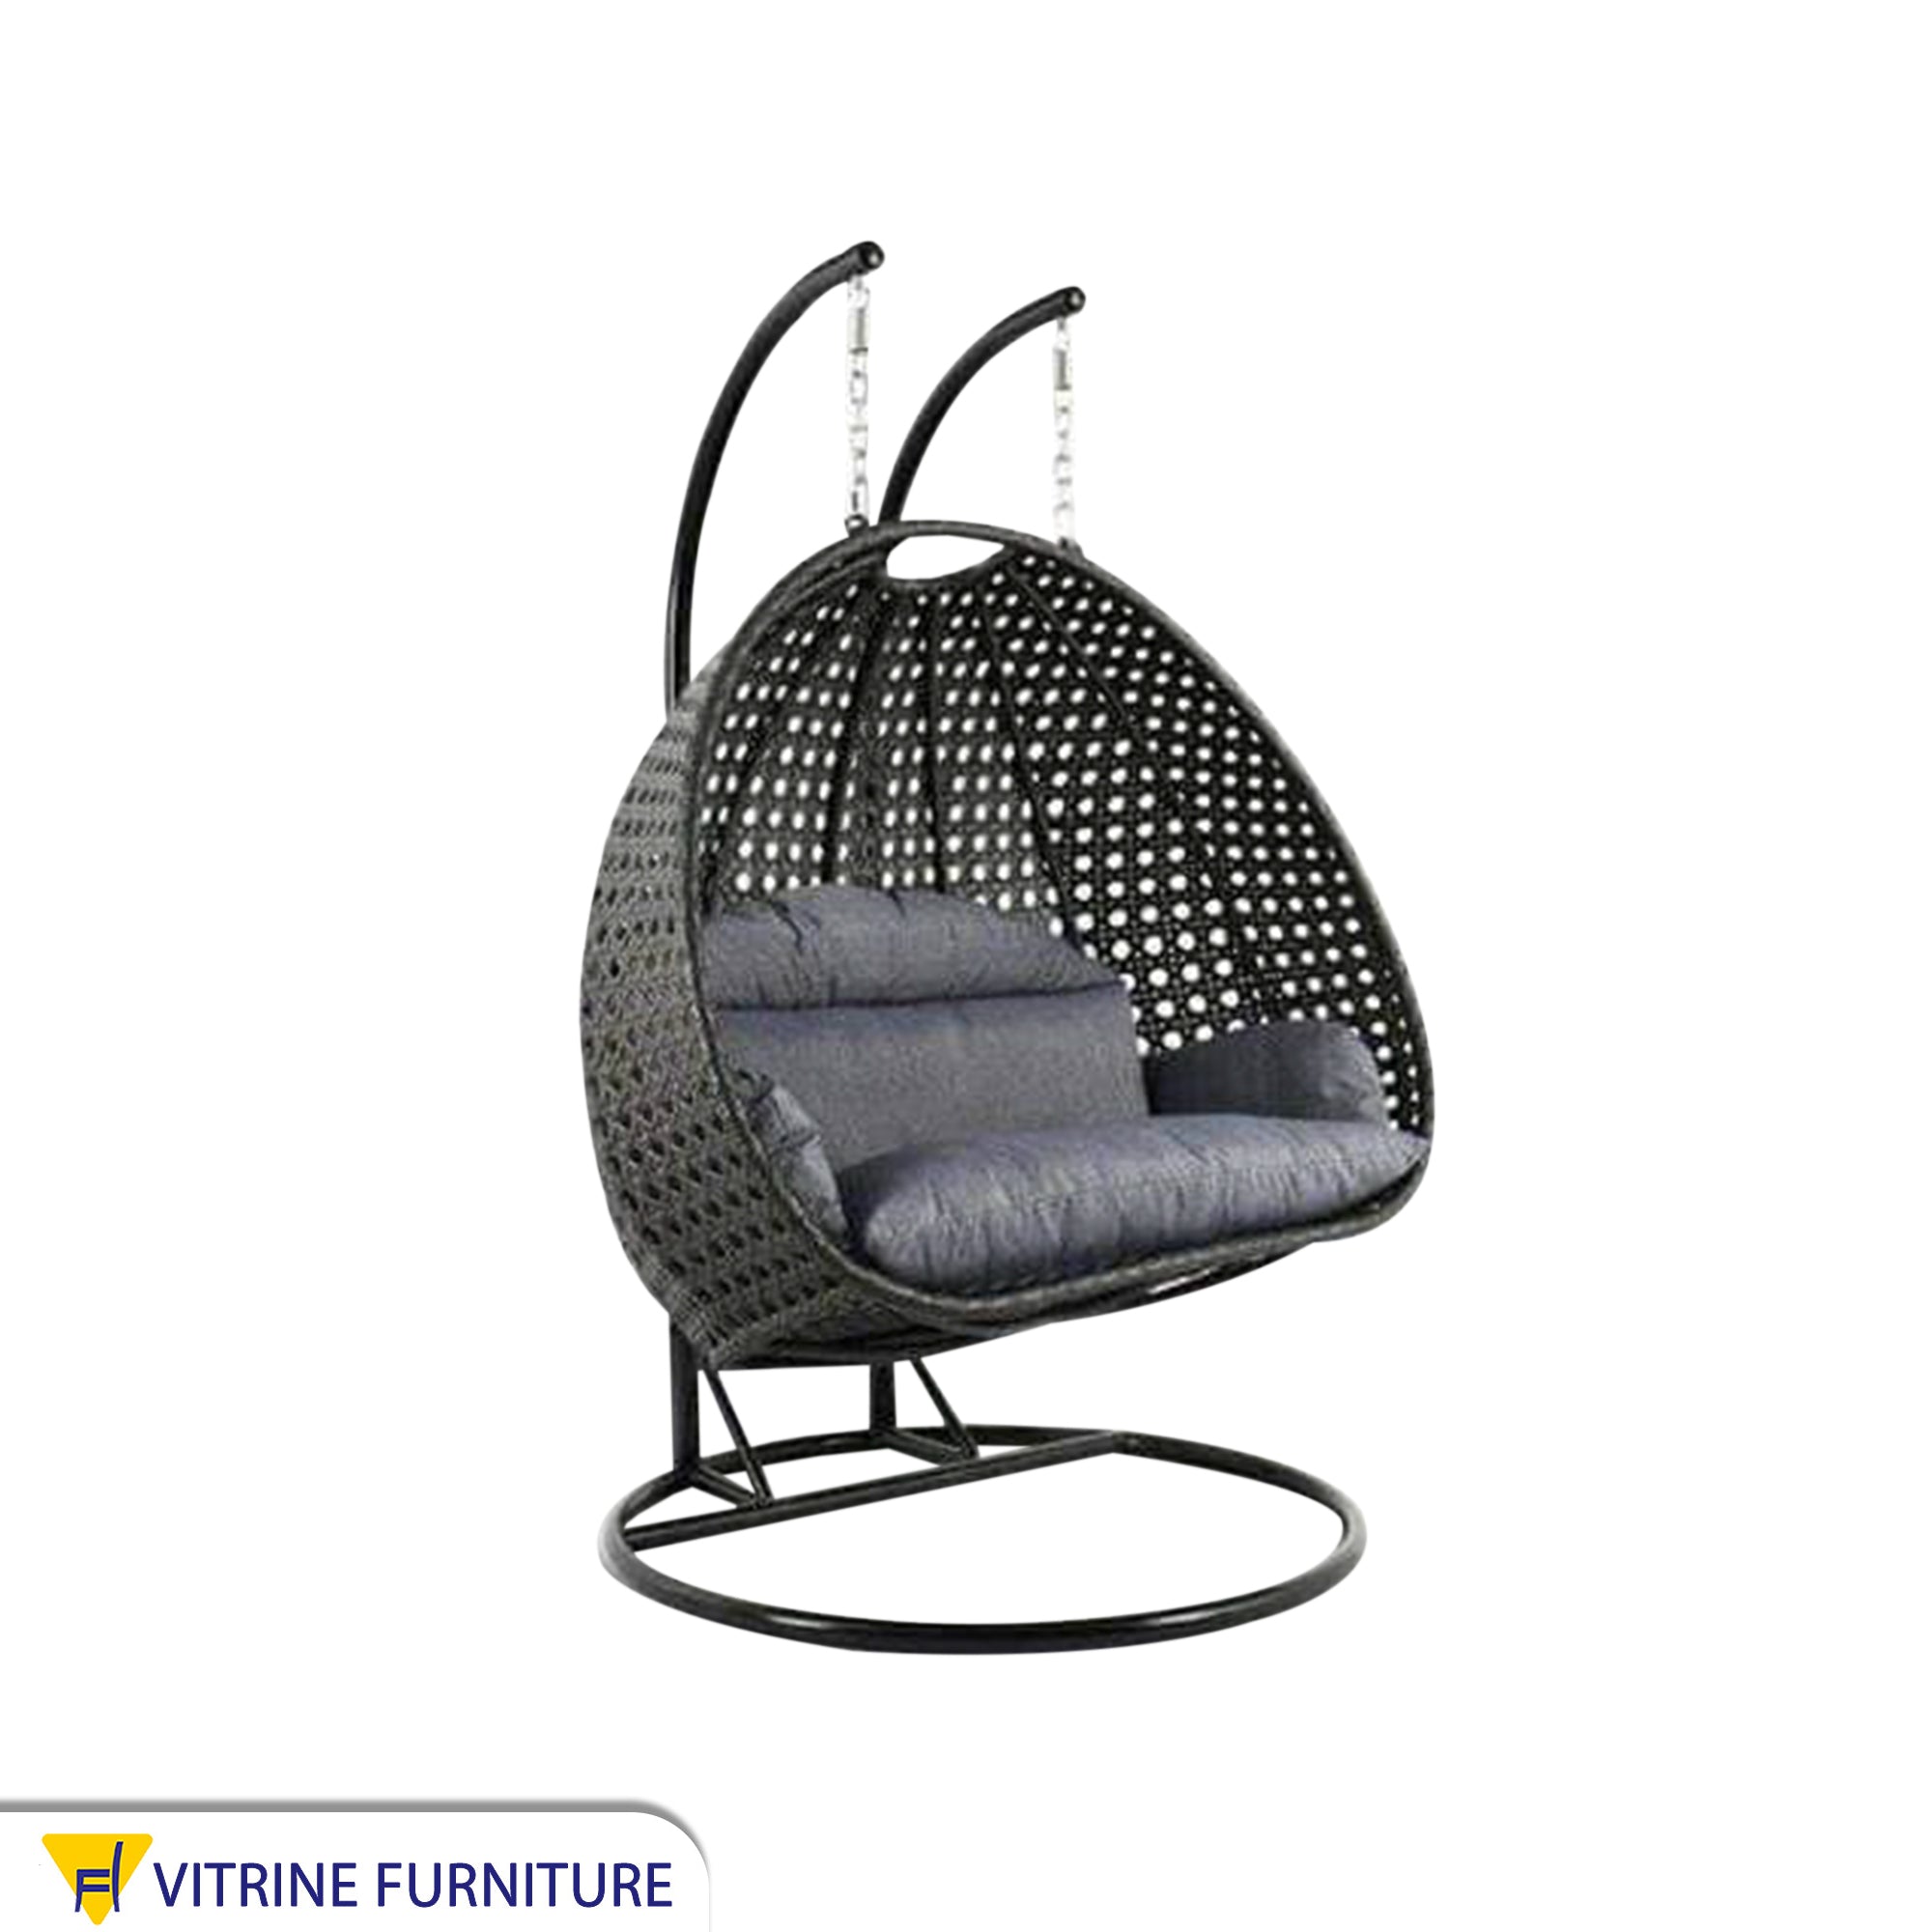 Double swing chair with flat base